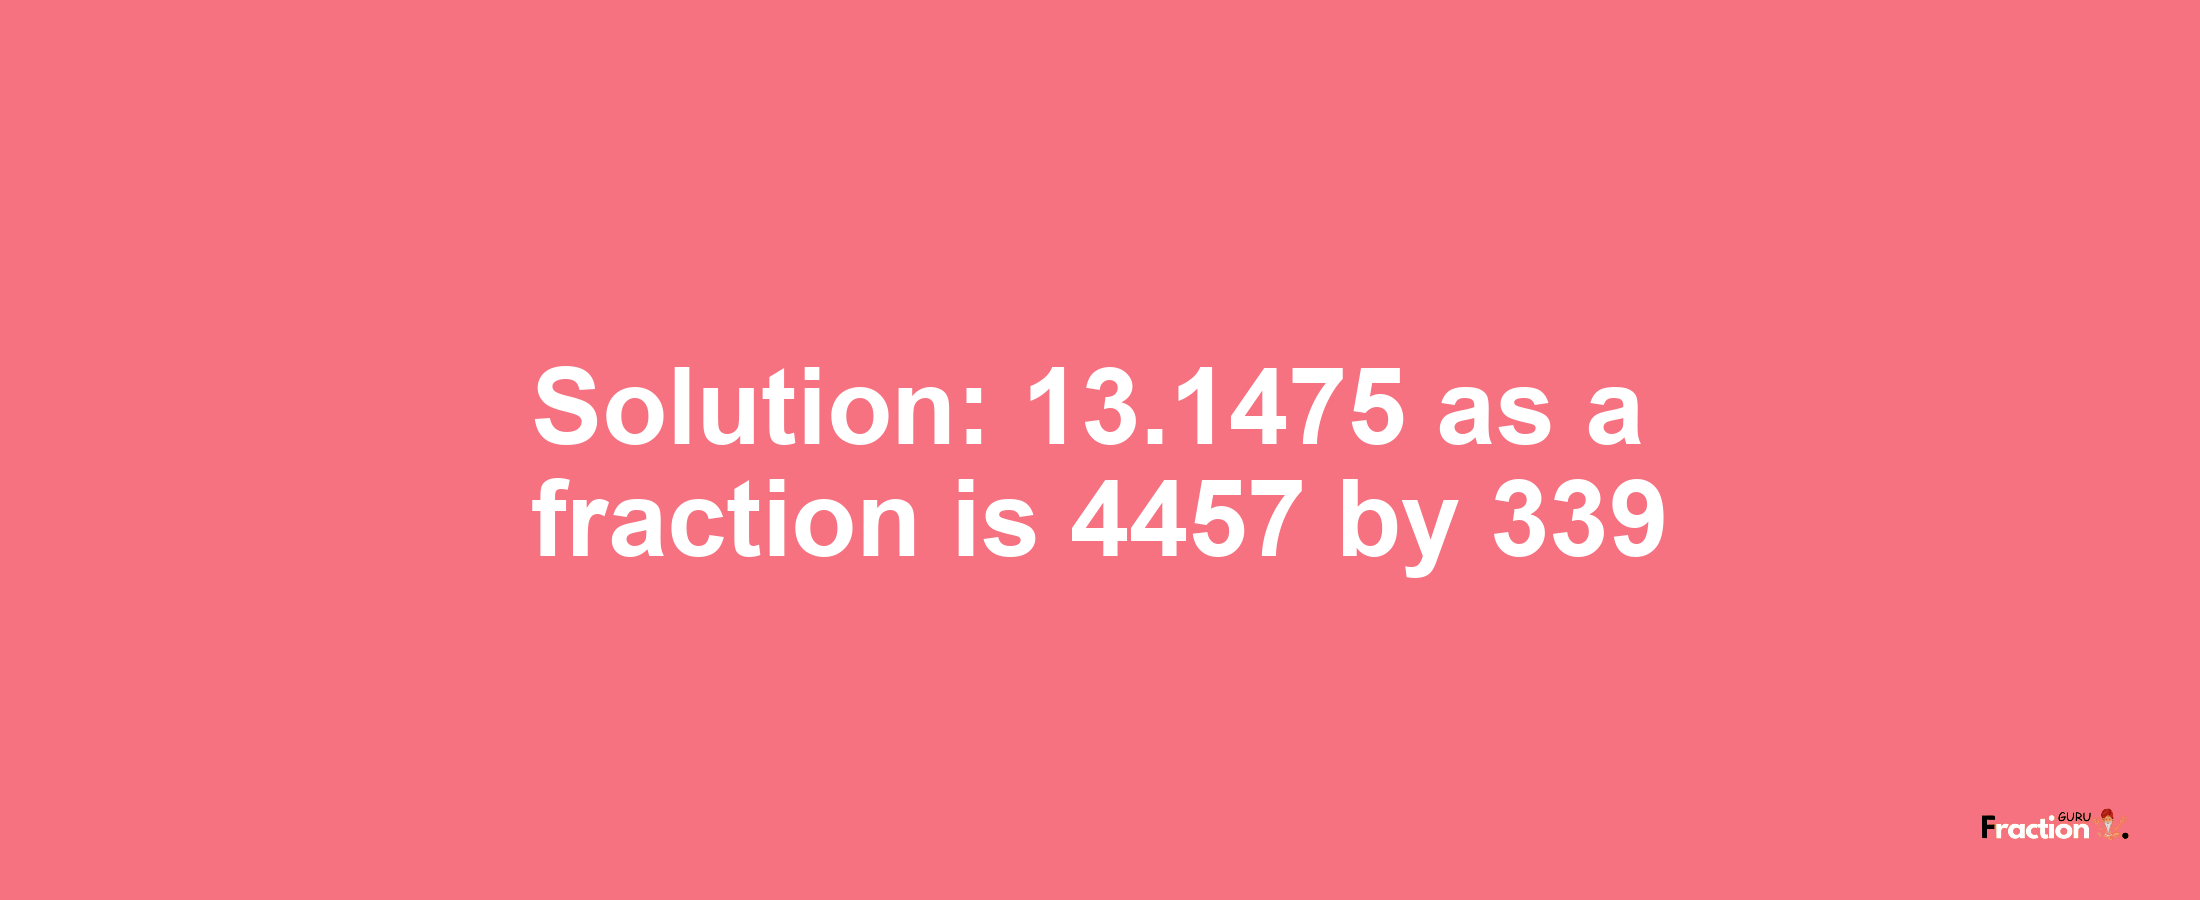 Solution:13.1475 as a fraction is 4457/339